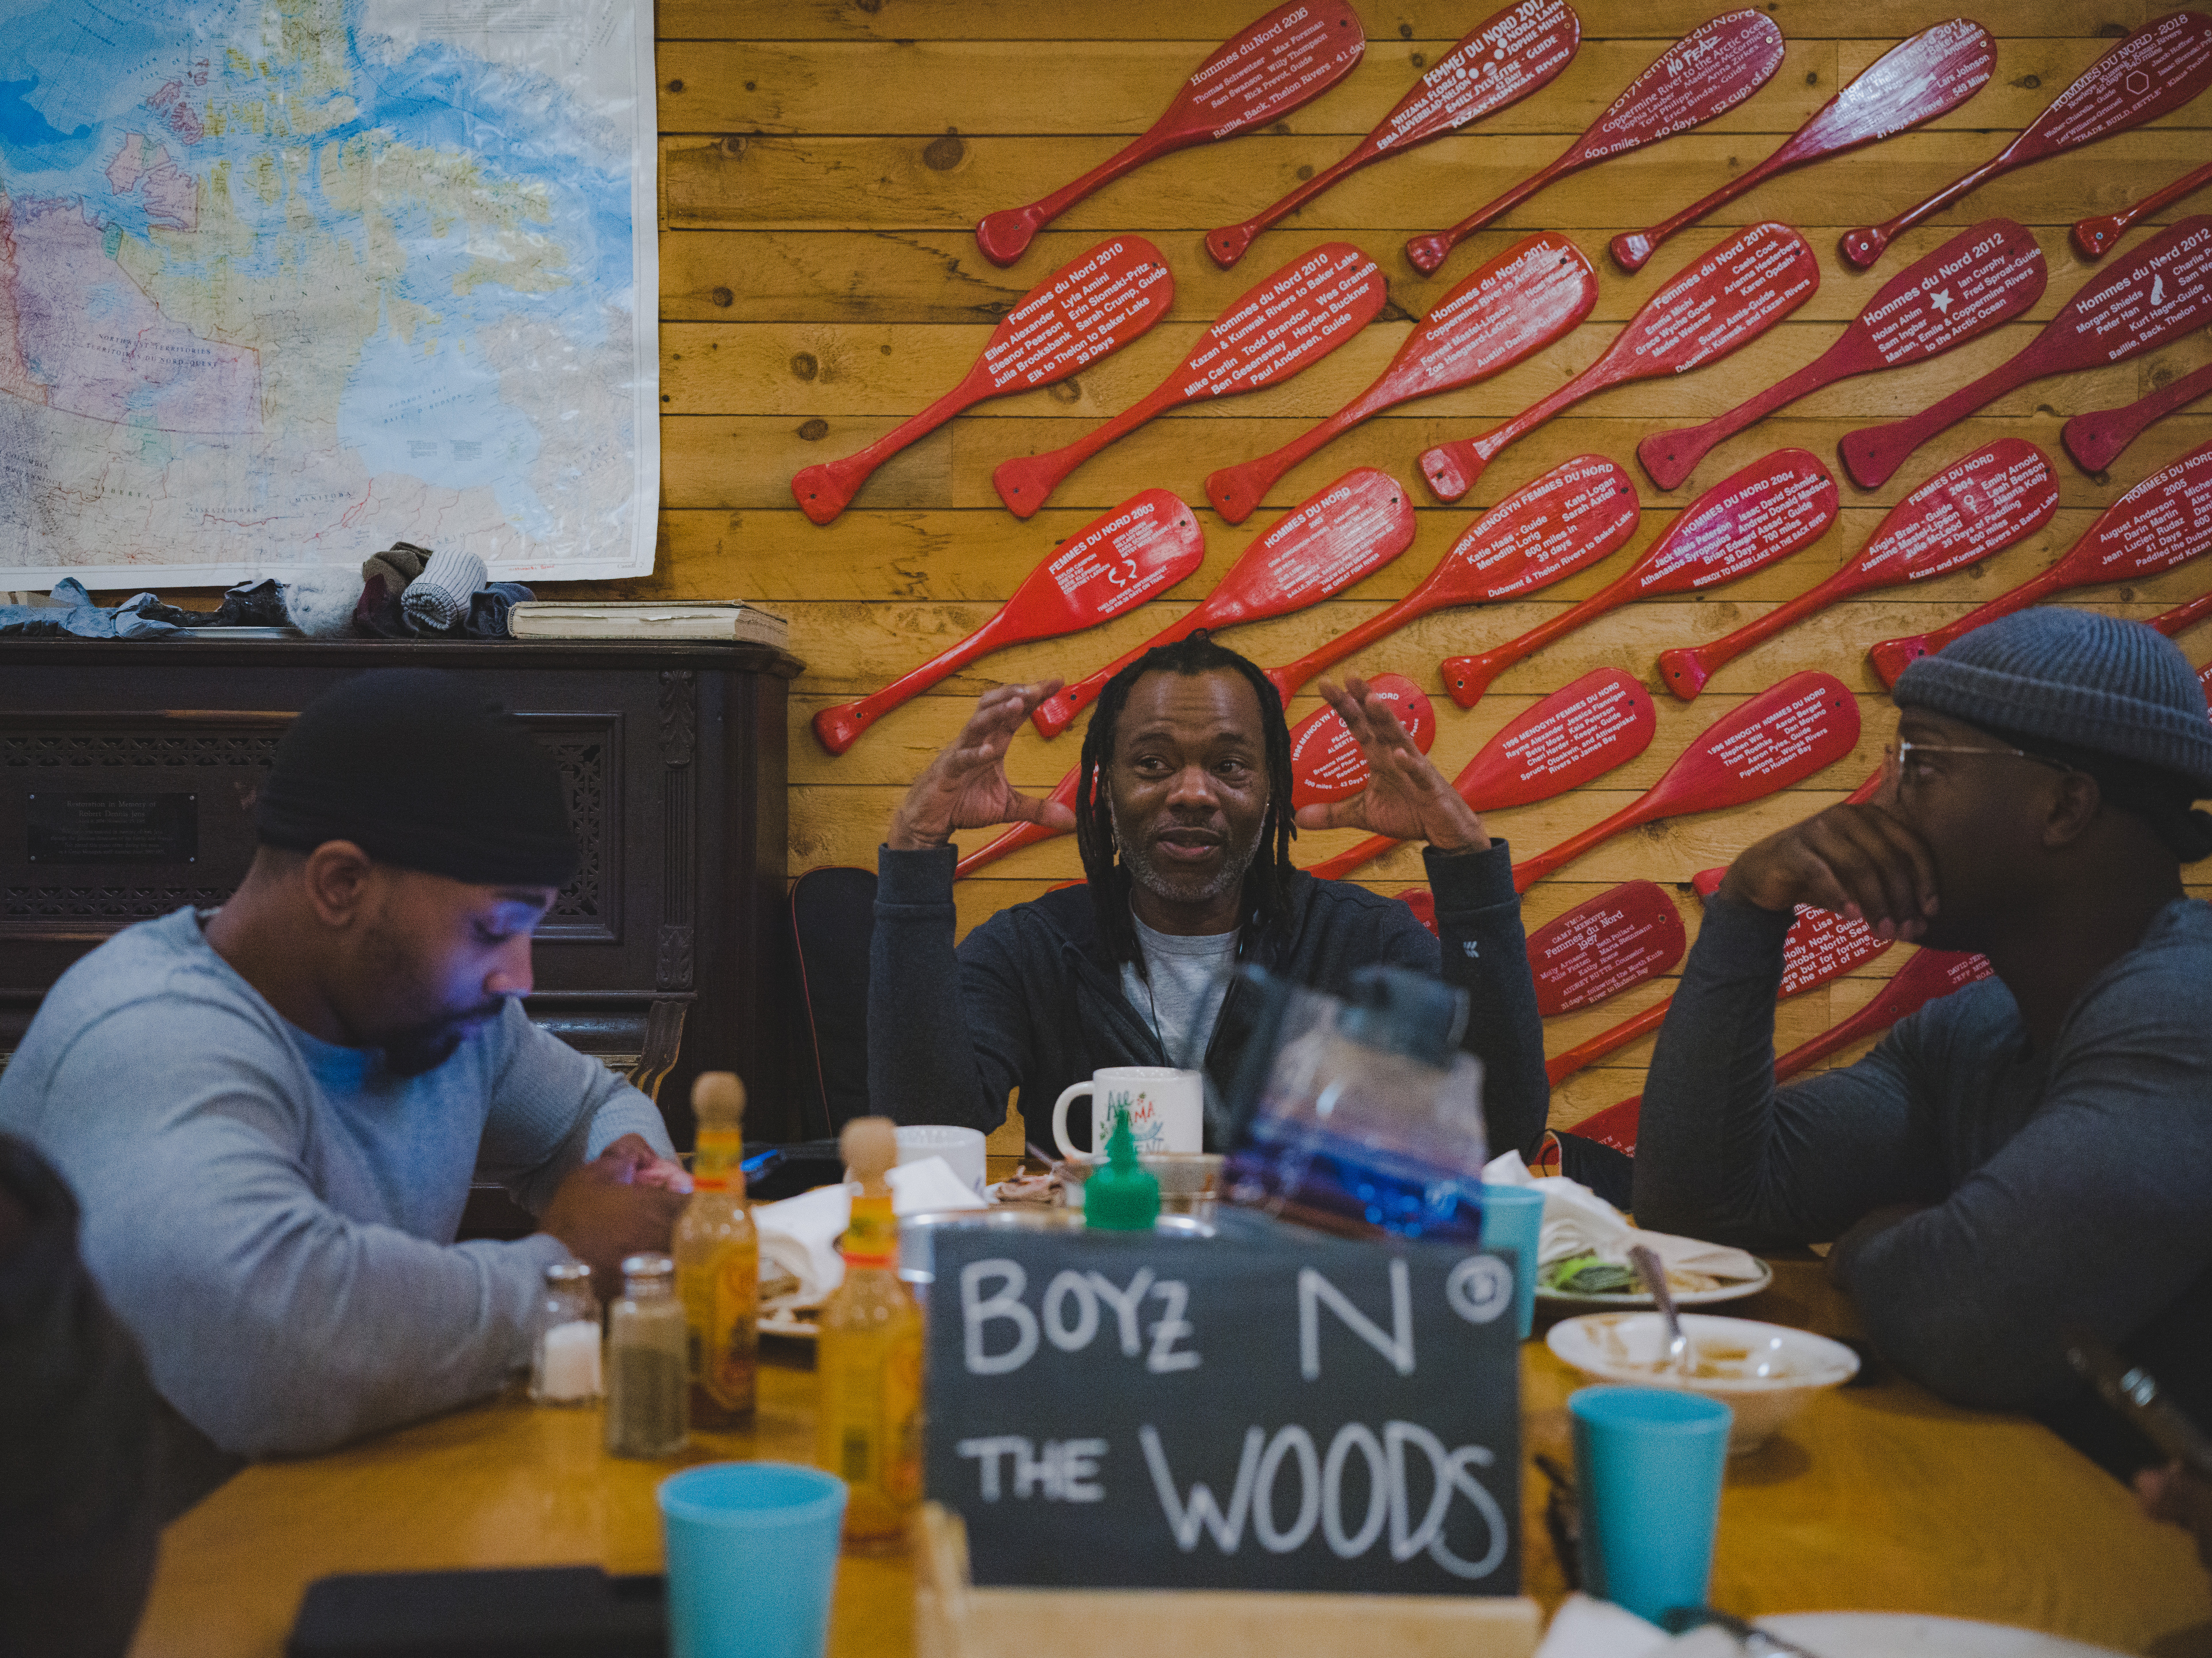 Boyz N The Wood retreat participants discuss amongst themselves during a meal at the Menogyn dining hall. (Photo Credit: Uzoma Obasi)